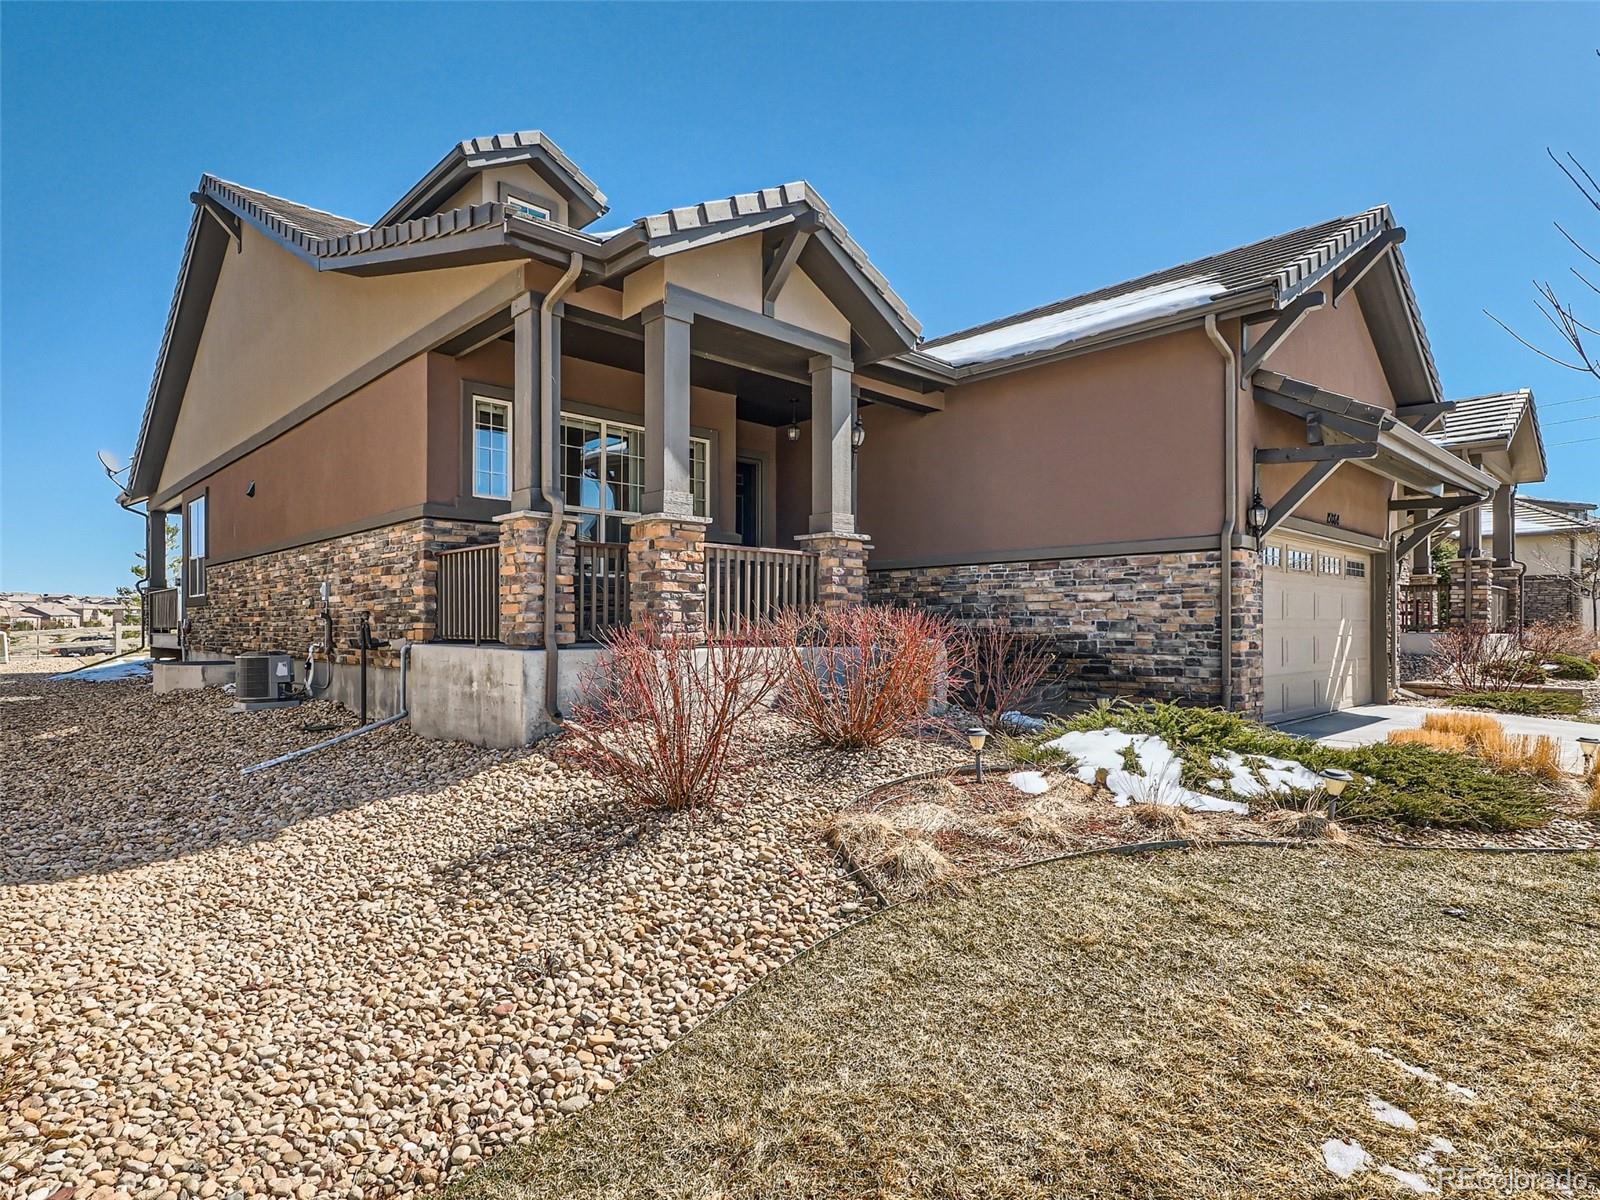 15864  wild horse drive, Broomfield sold home. Closed on 2024-05-14 for $749,000.